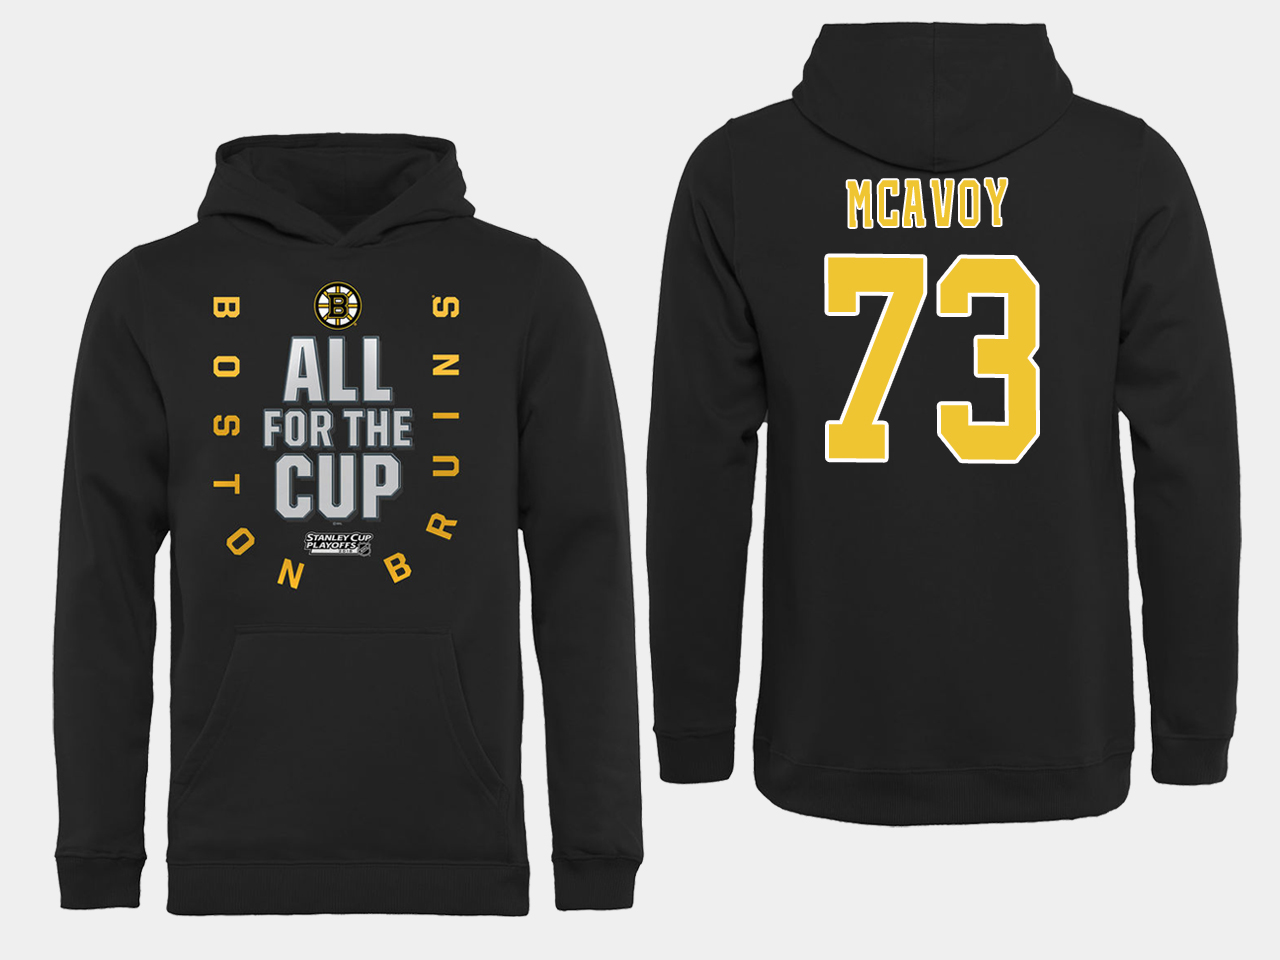 NHL Men Boston Bruins #73 Mcavoy Black All for the Cup Hoodie->boston bruins->NHL Jersey